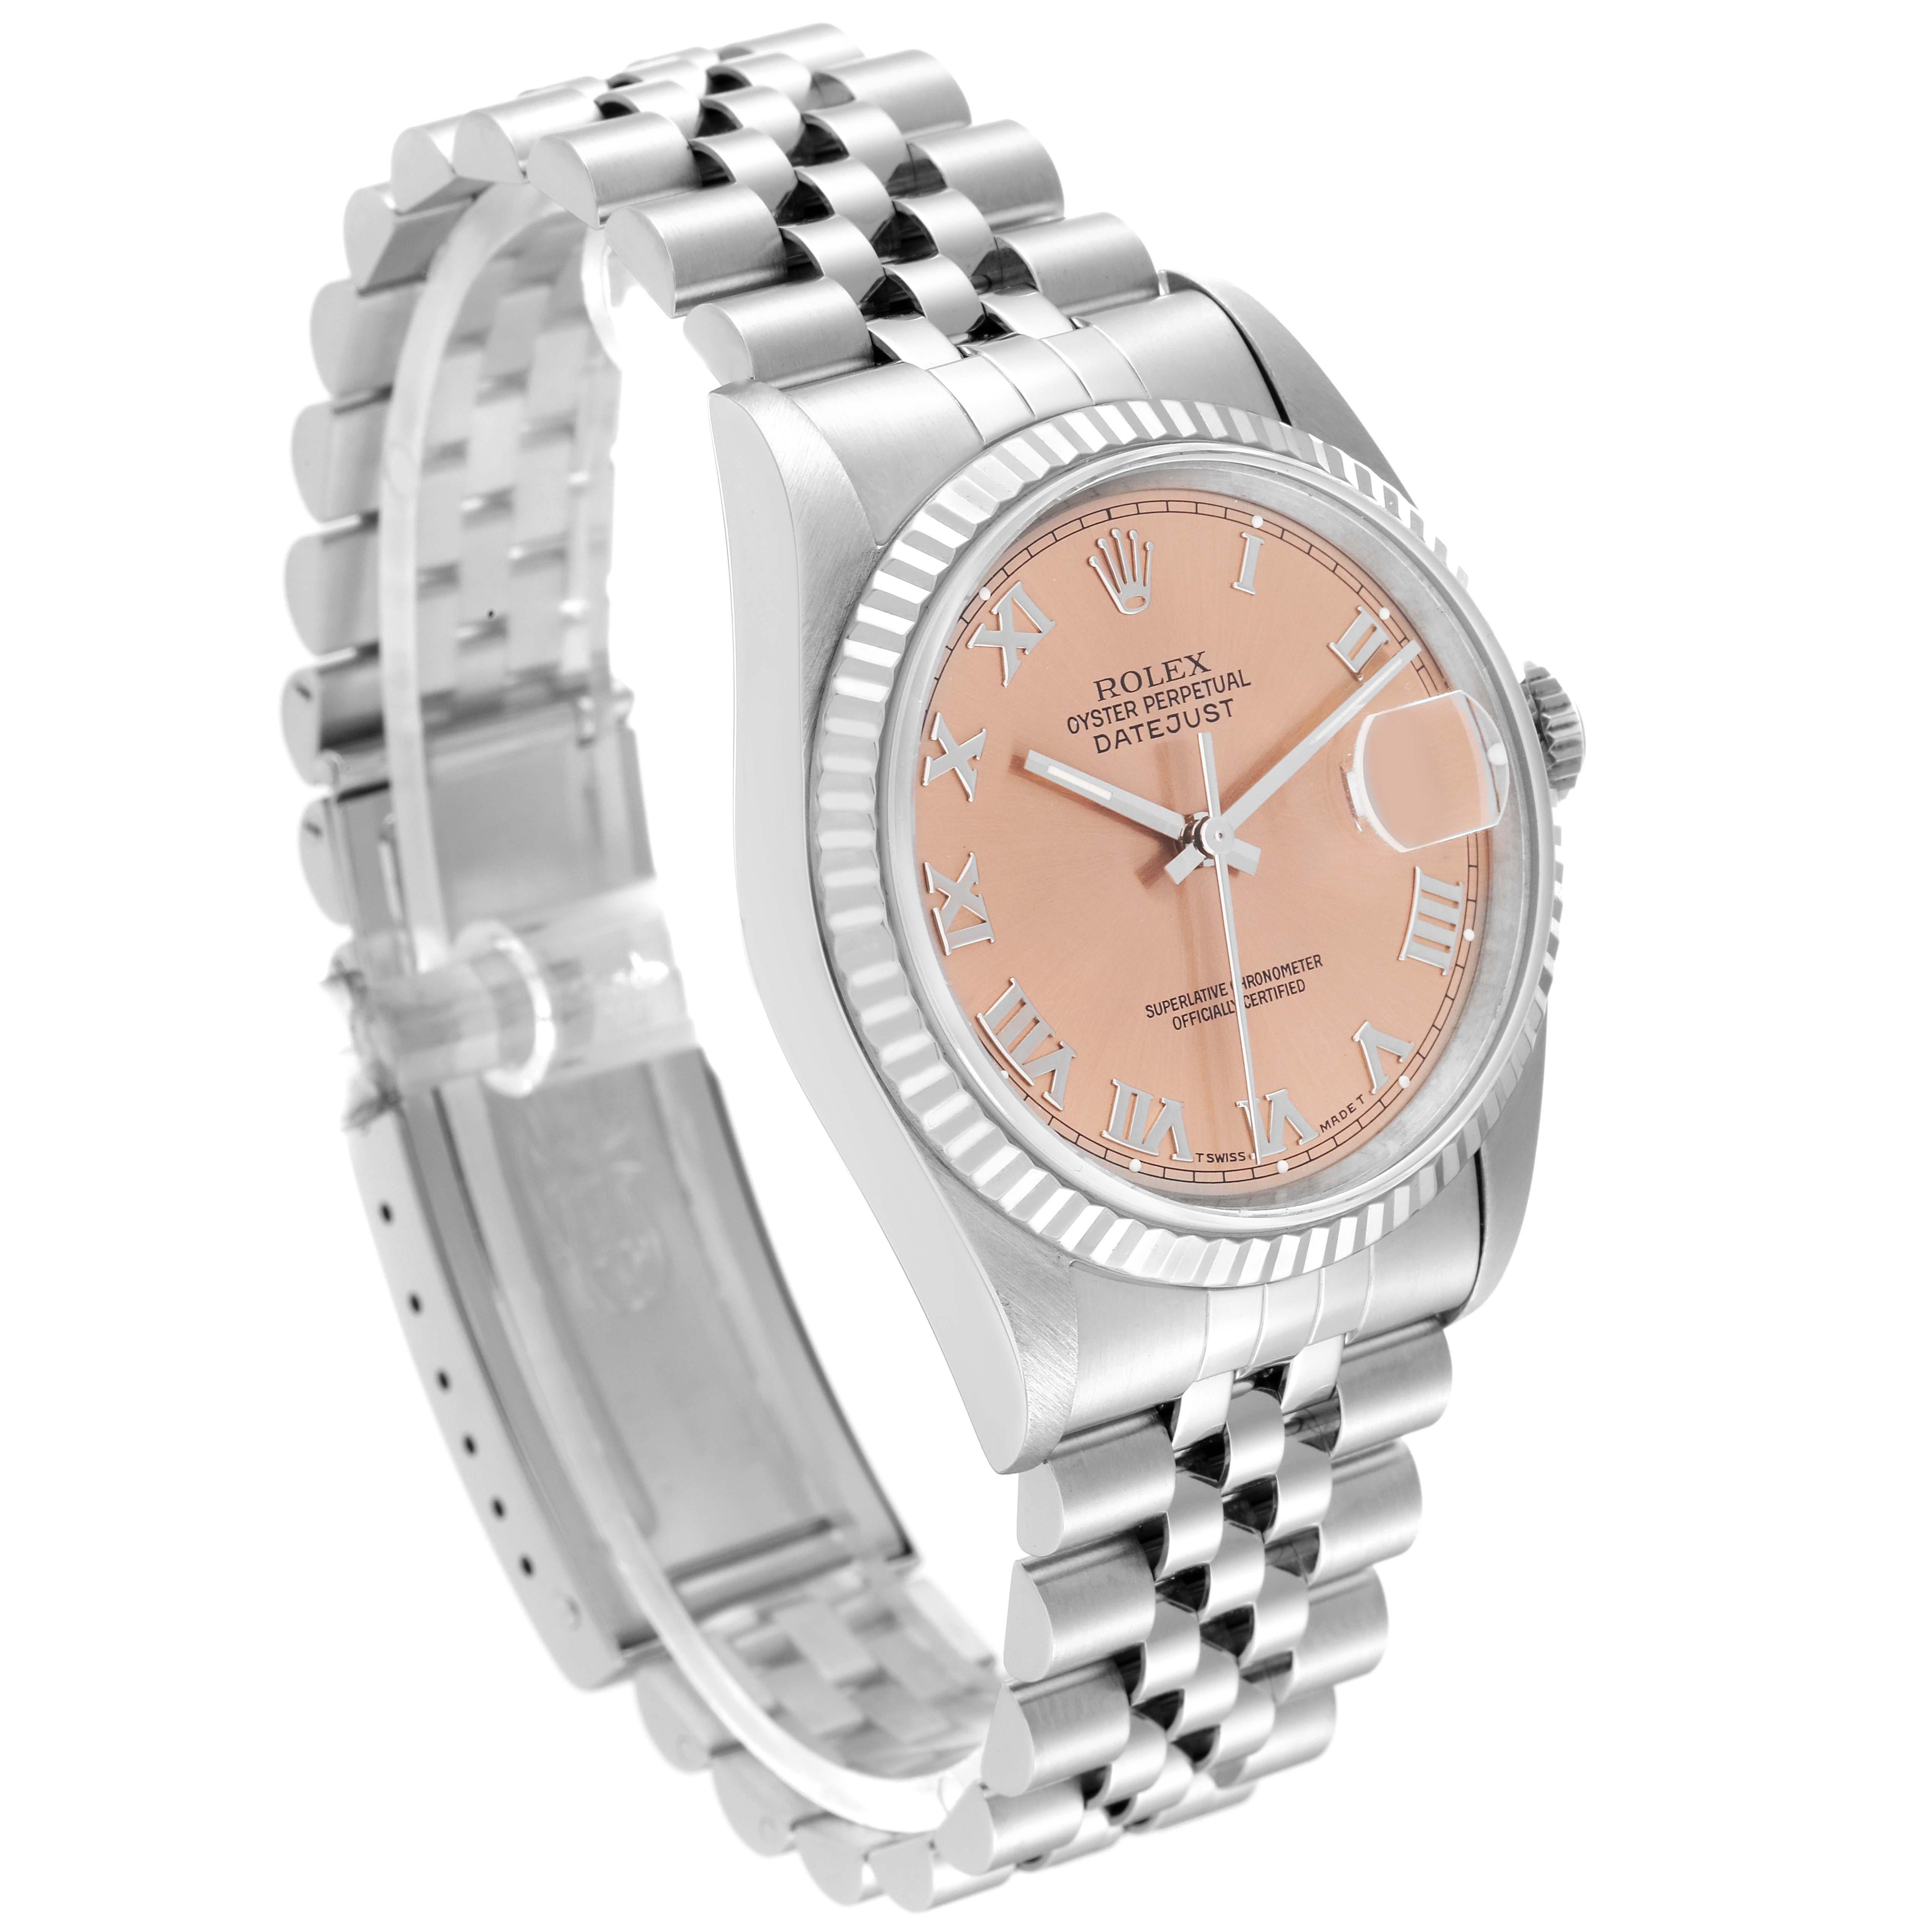 Rolex Datejust 36 Steel White Gold Salmon Roman Dial Mens Watch 16234 In Excellent Condition For Sale In Atlanta, GA